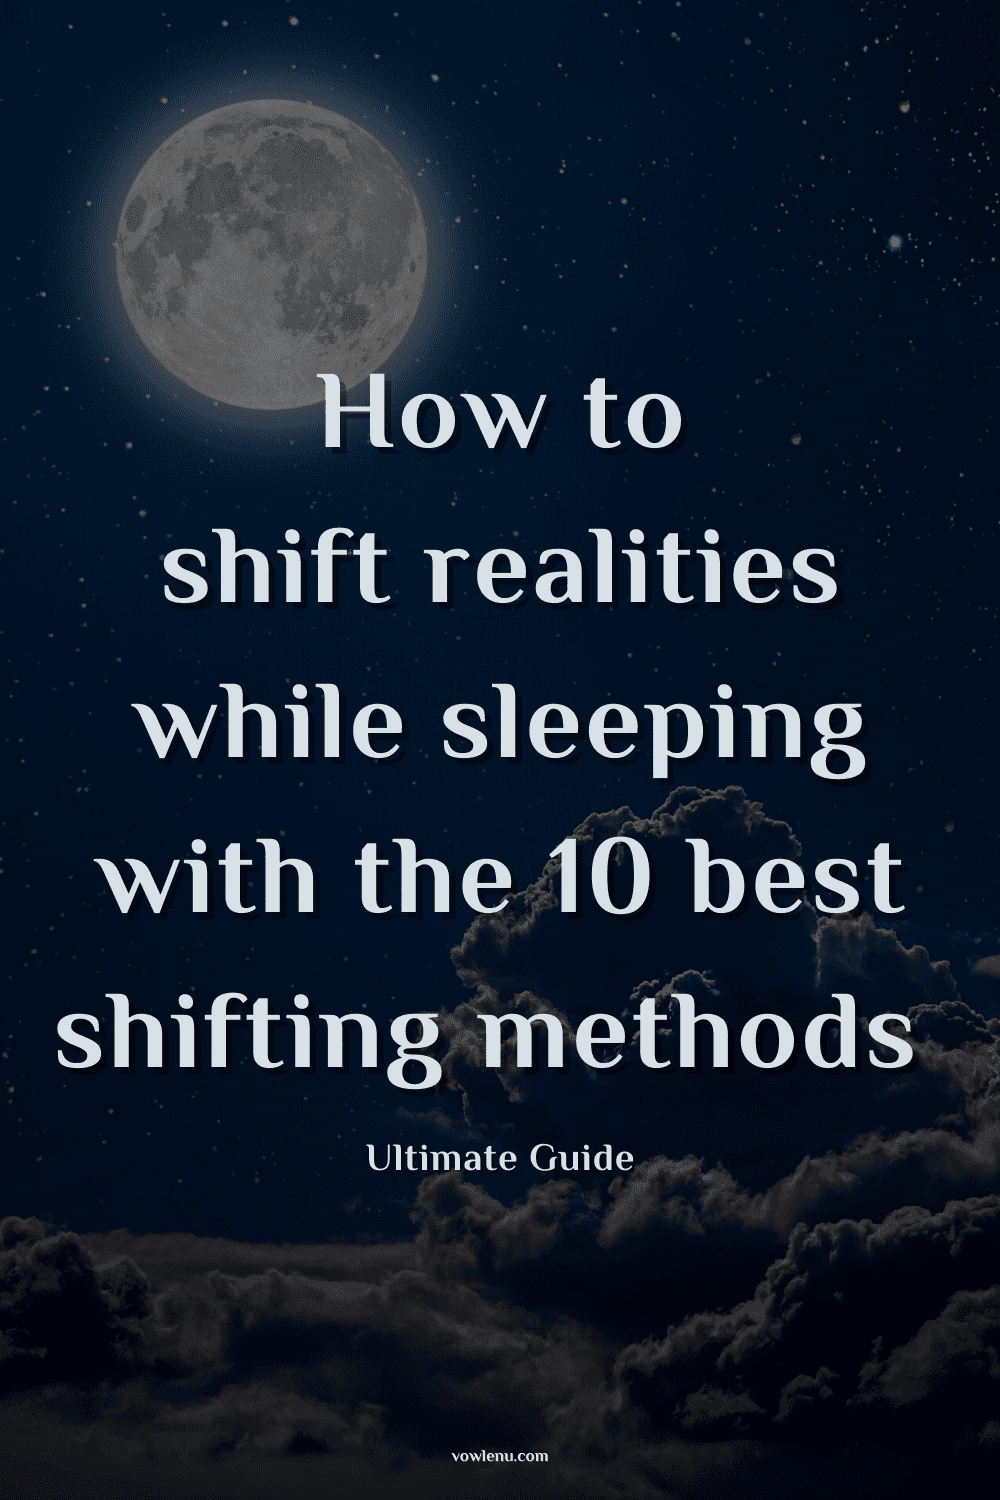 How to shift realities while sleeping with the 10 best shifting methods and how to use them